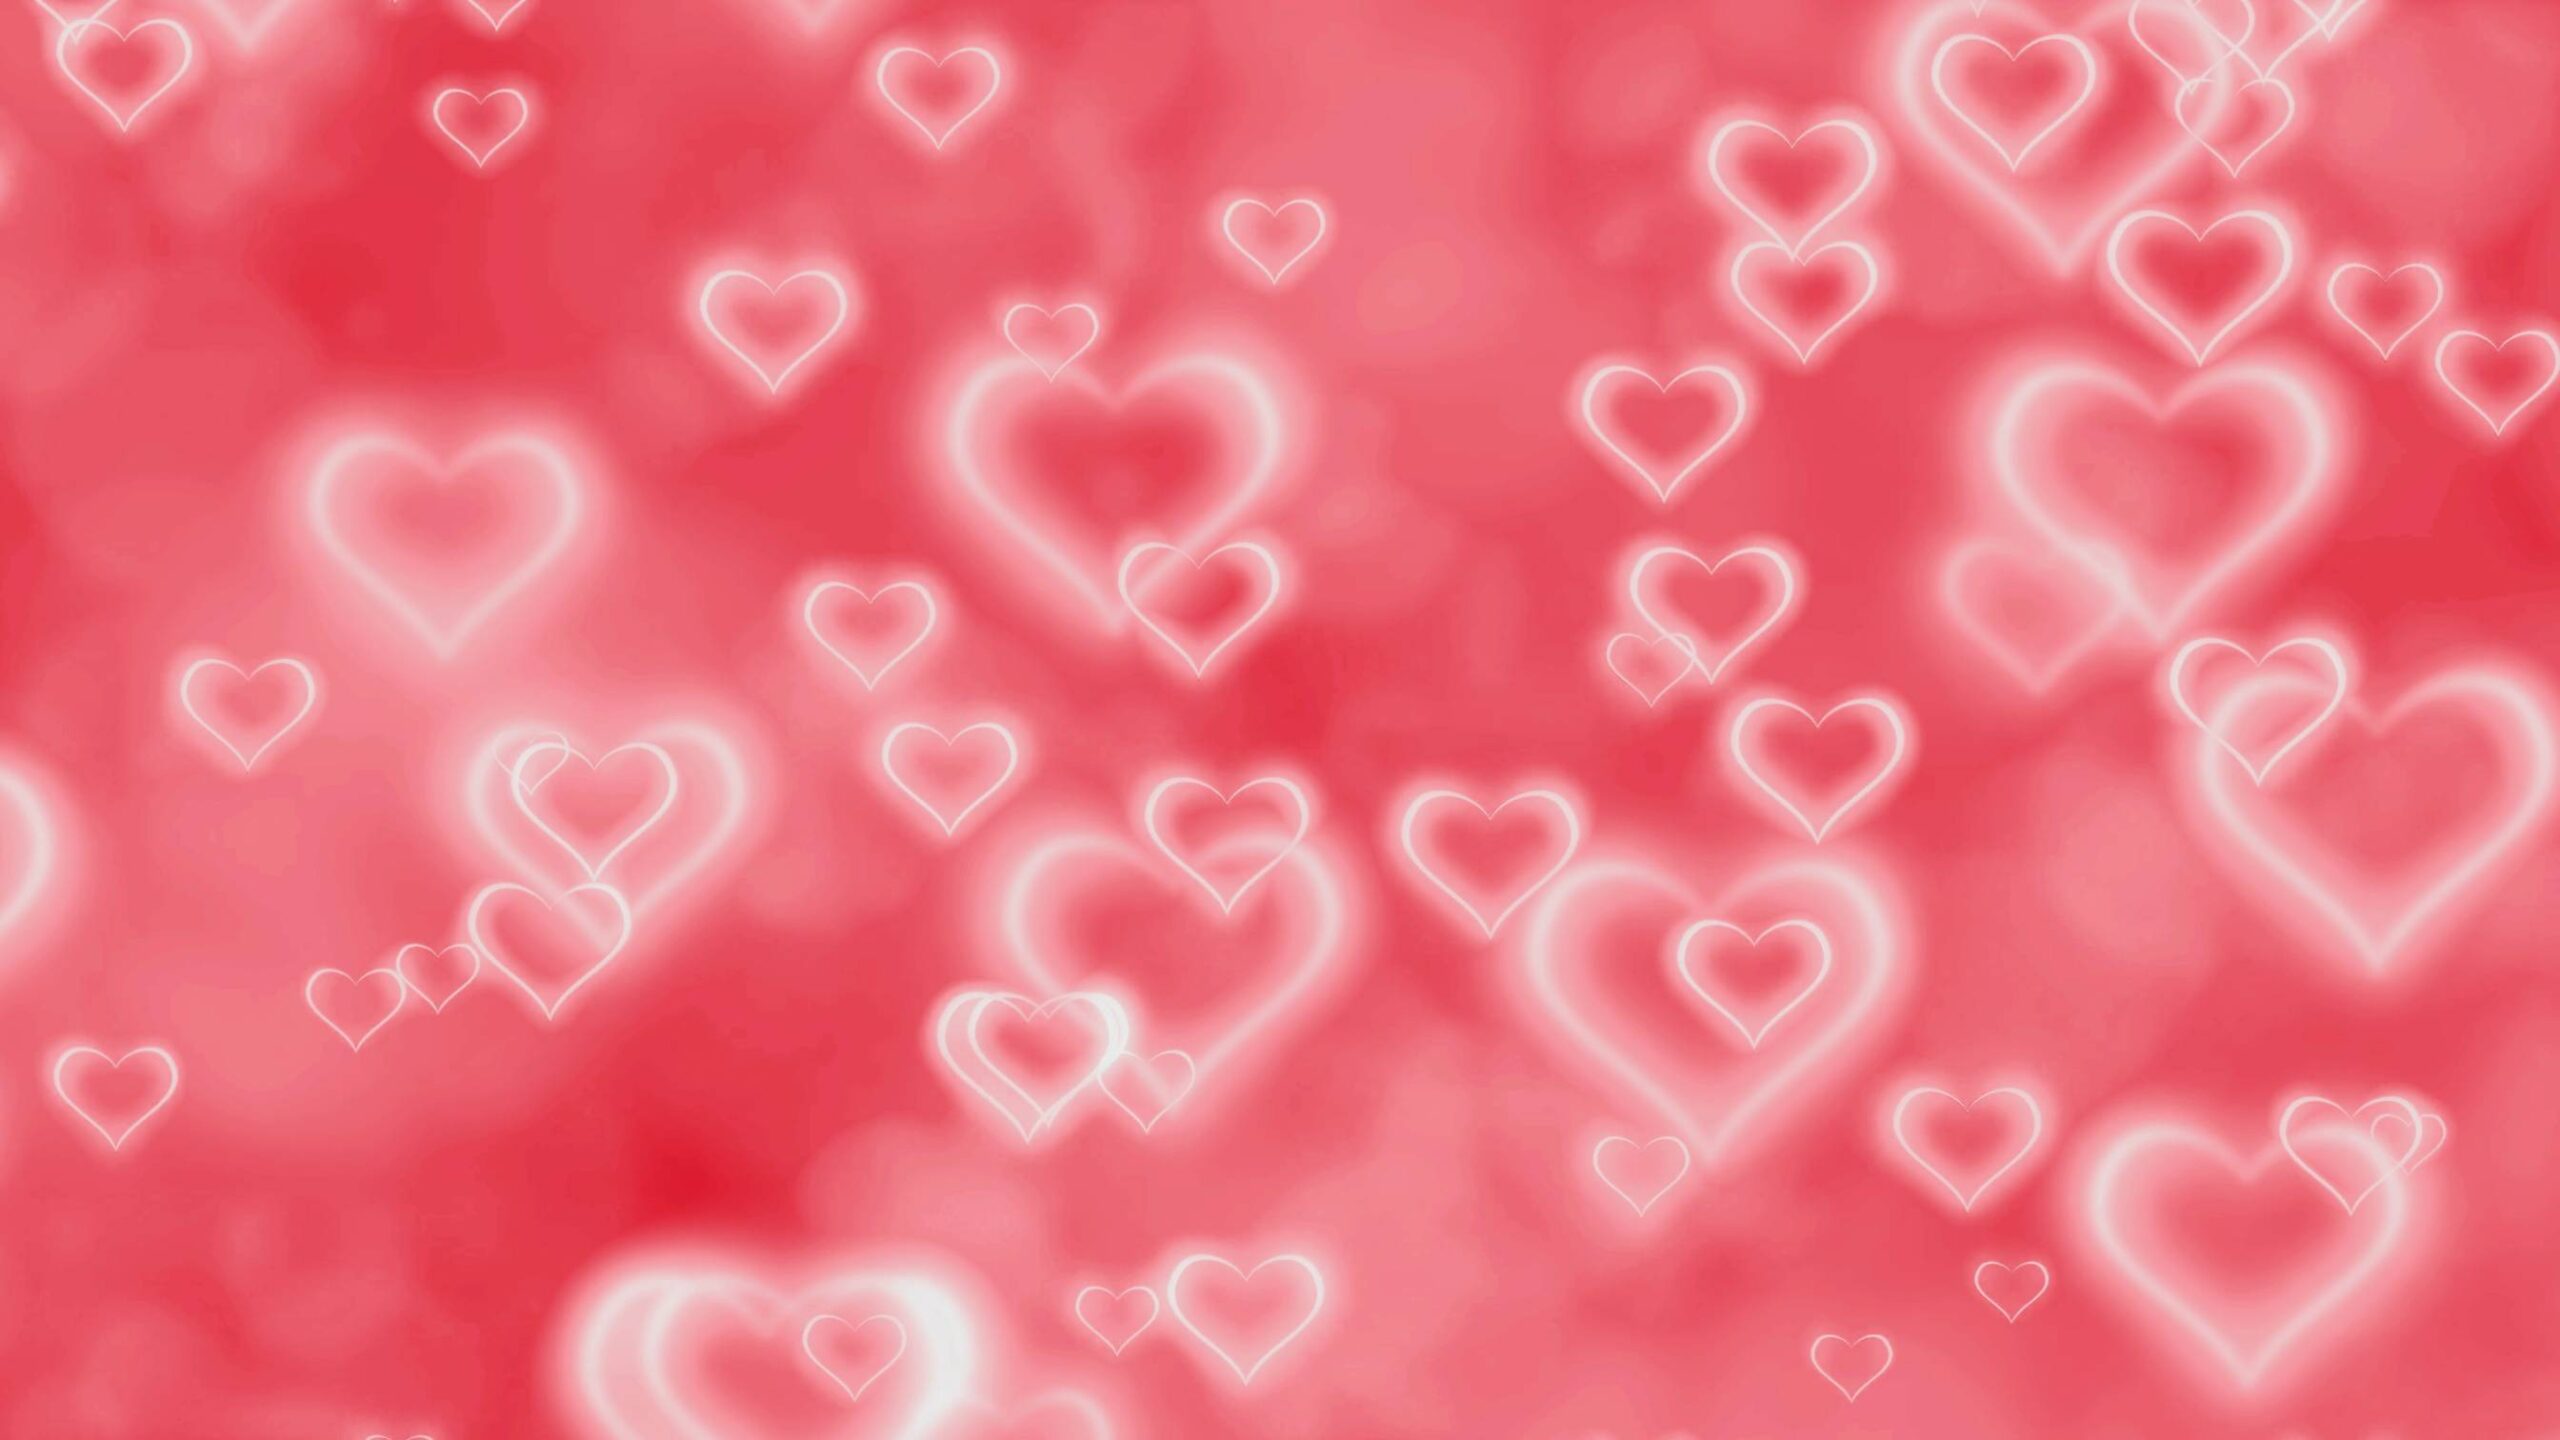 Glowing Hearts Valentine’s Day Screensaver || FREE DOWNLOAD || 4K Motion Background